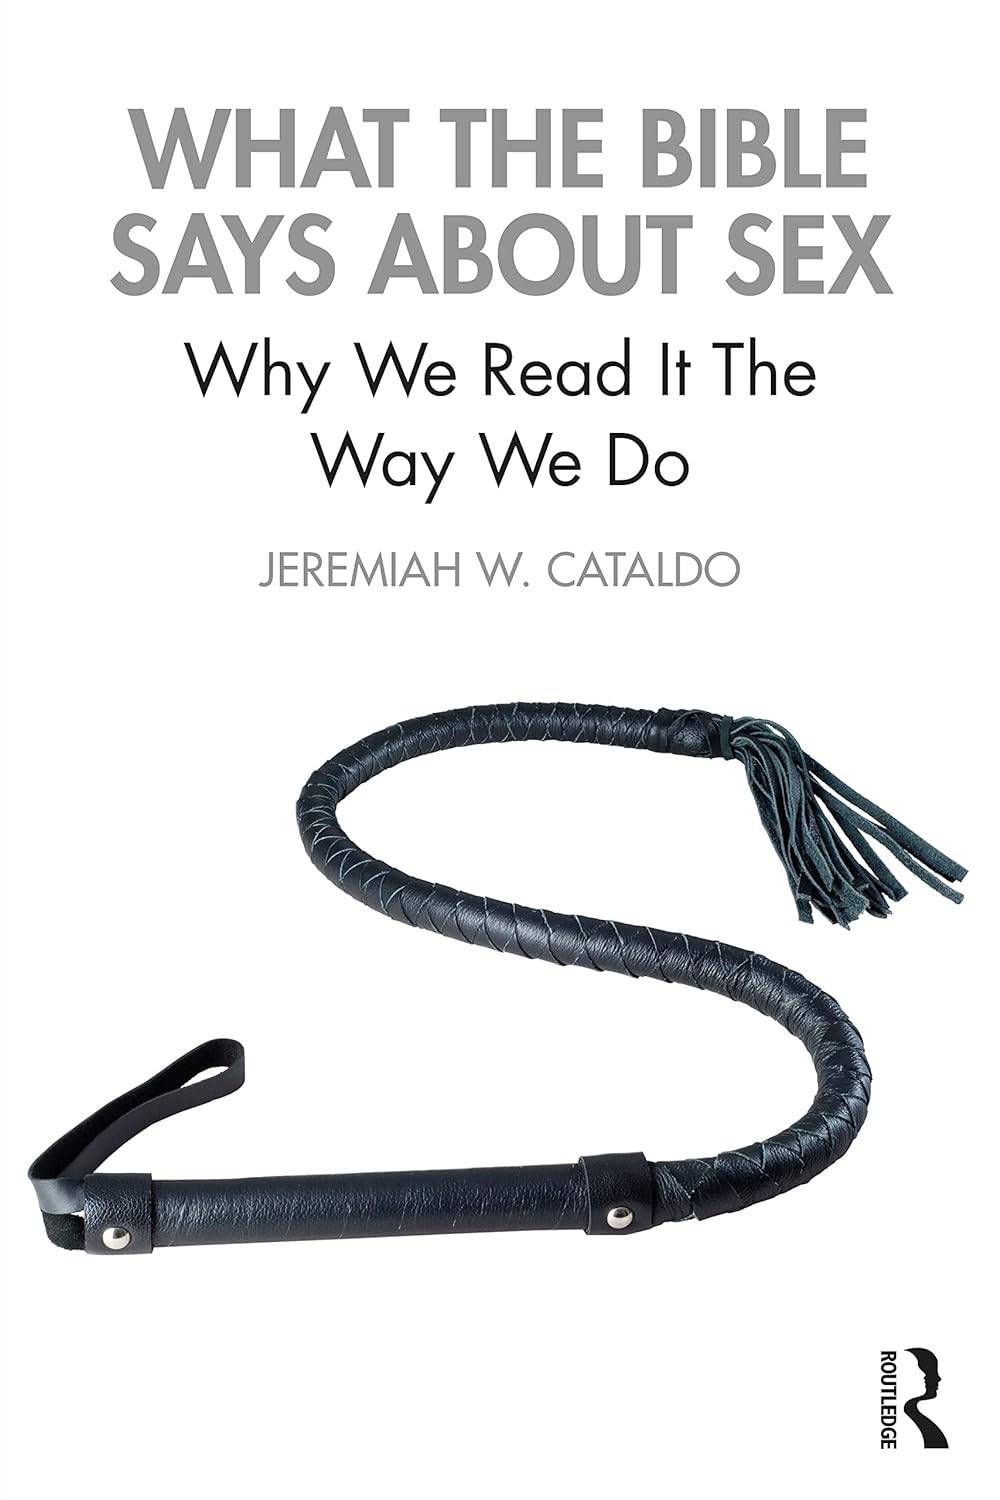 Book cover for Jeremiah Cataldo